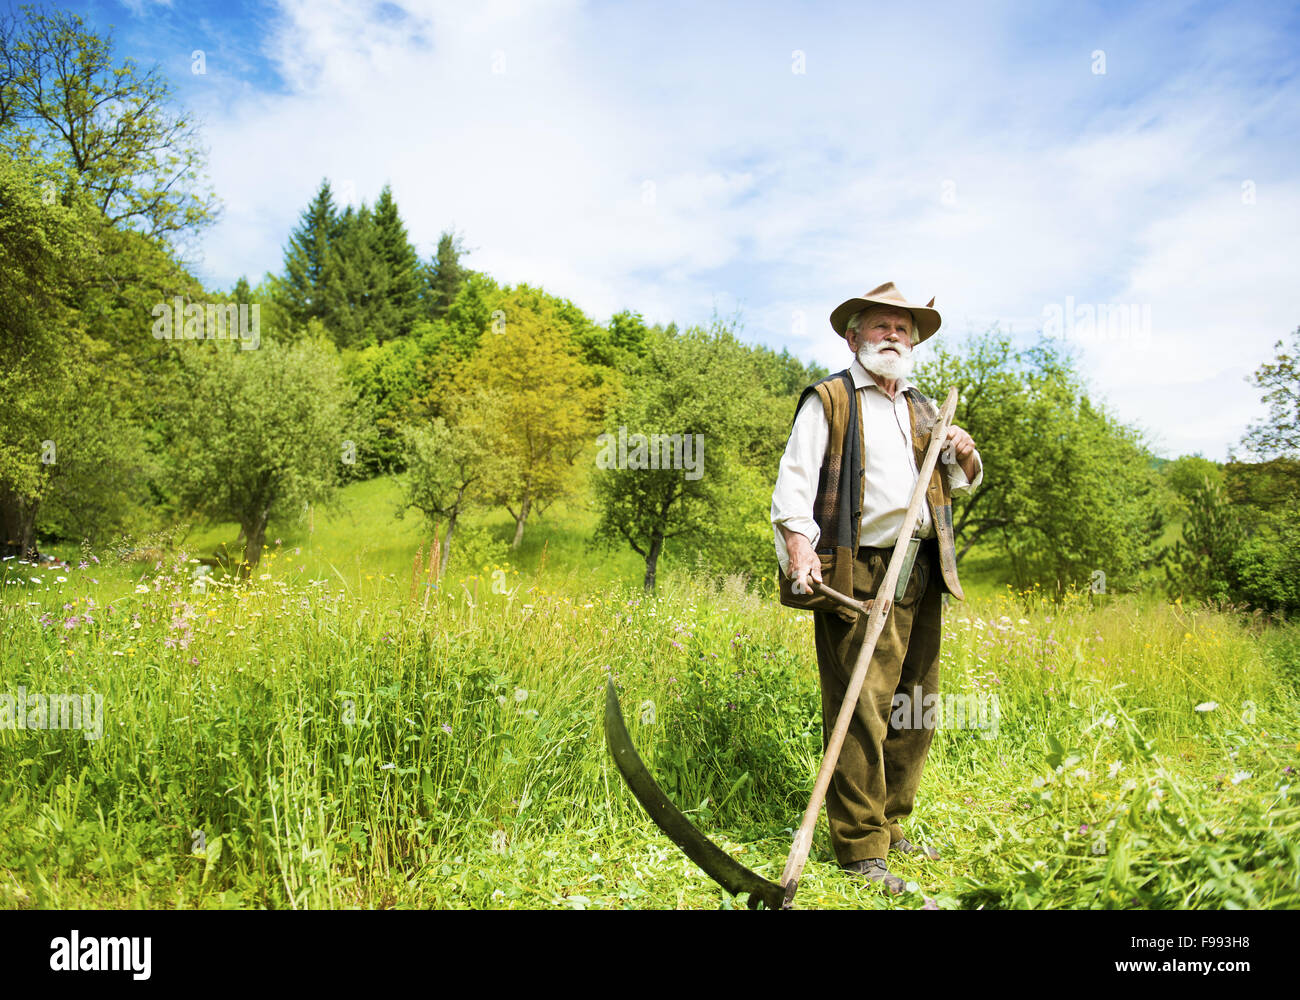 Old farmer with beard using scythe to mow the grass traditionally Stock Photo